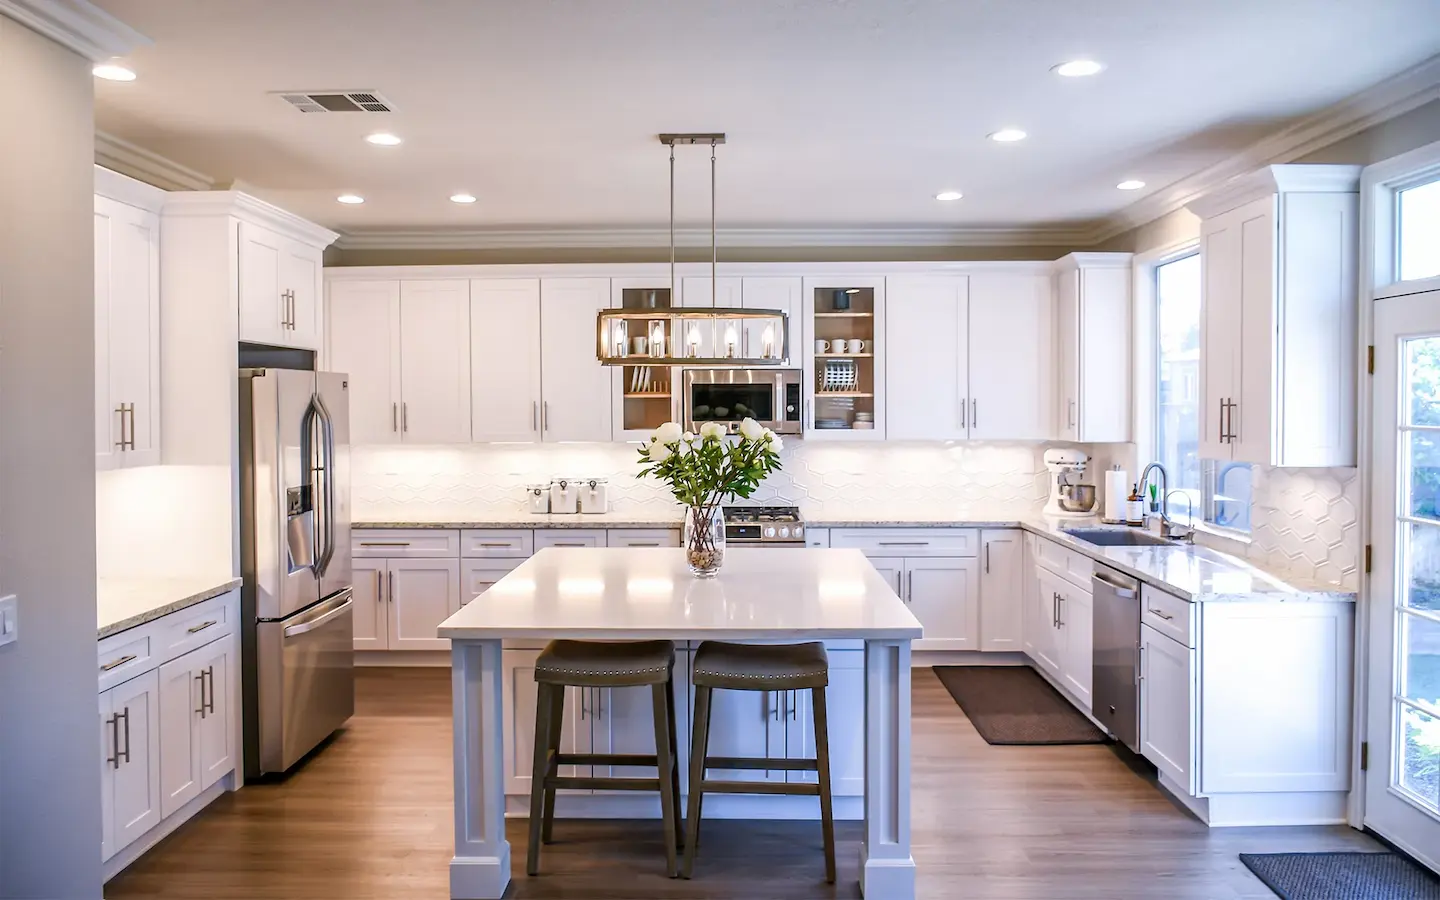 A Guide to Remodeling Kitchen Cabinets